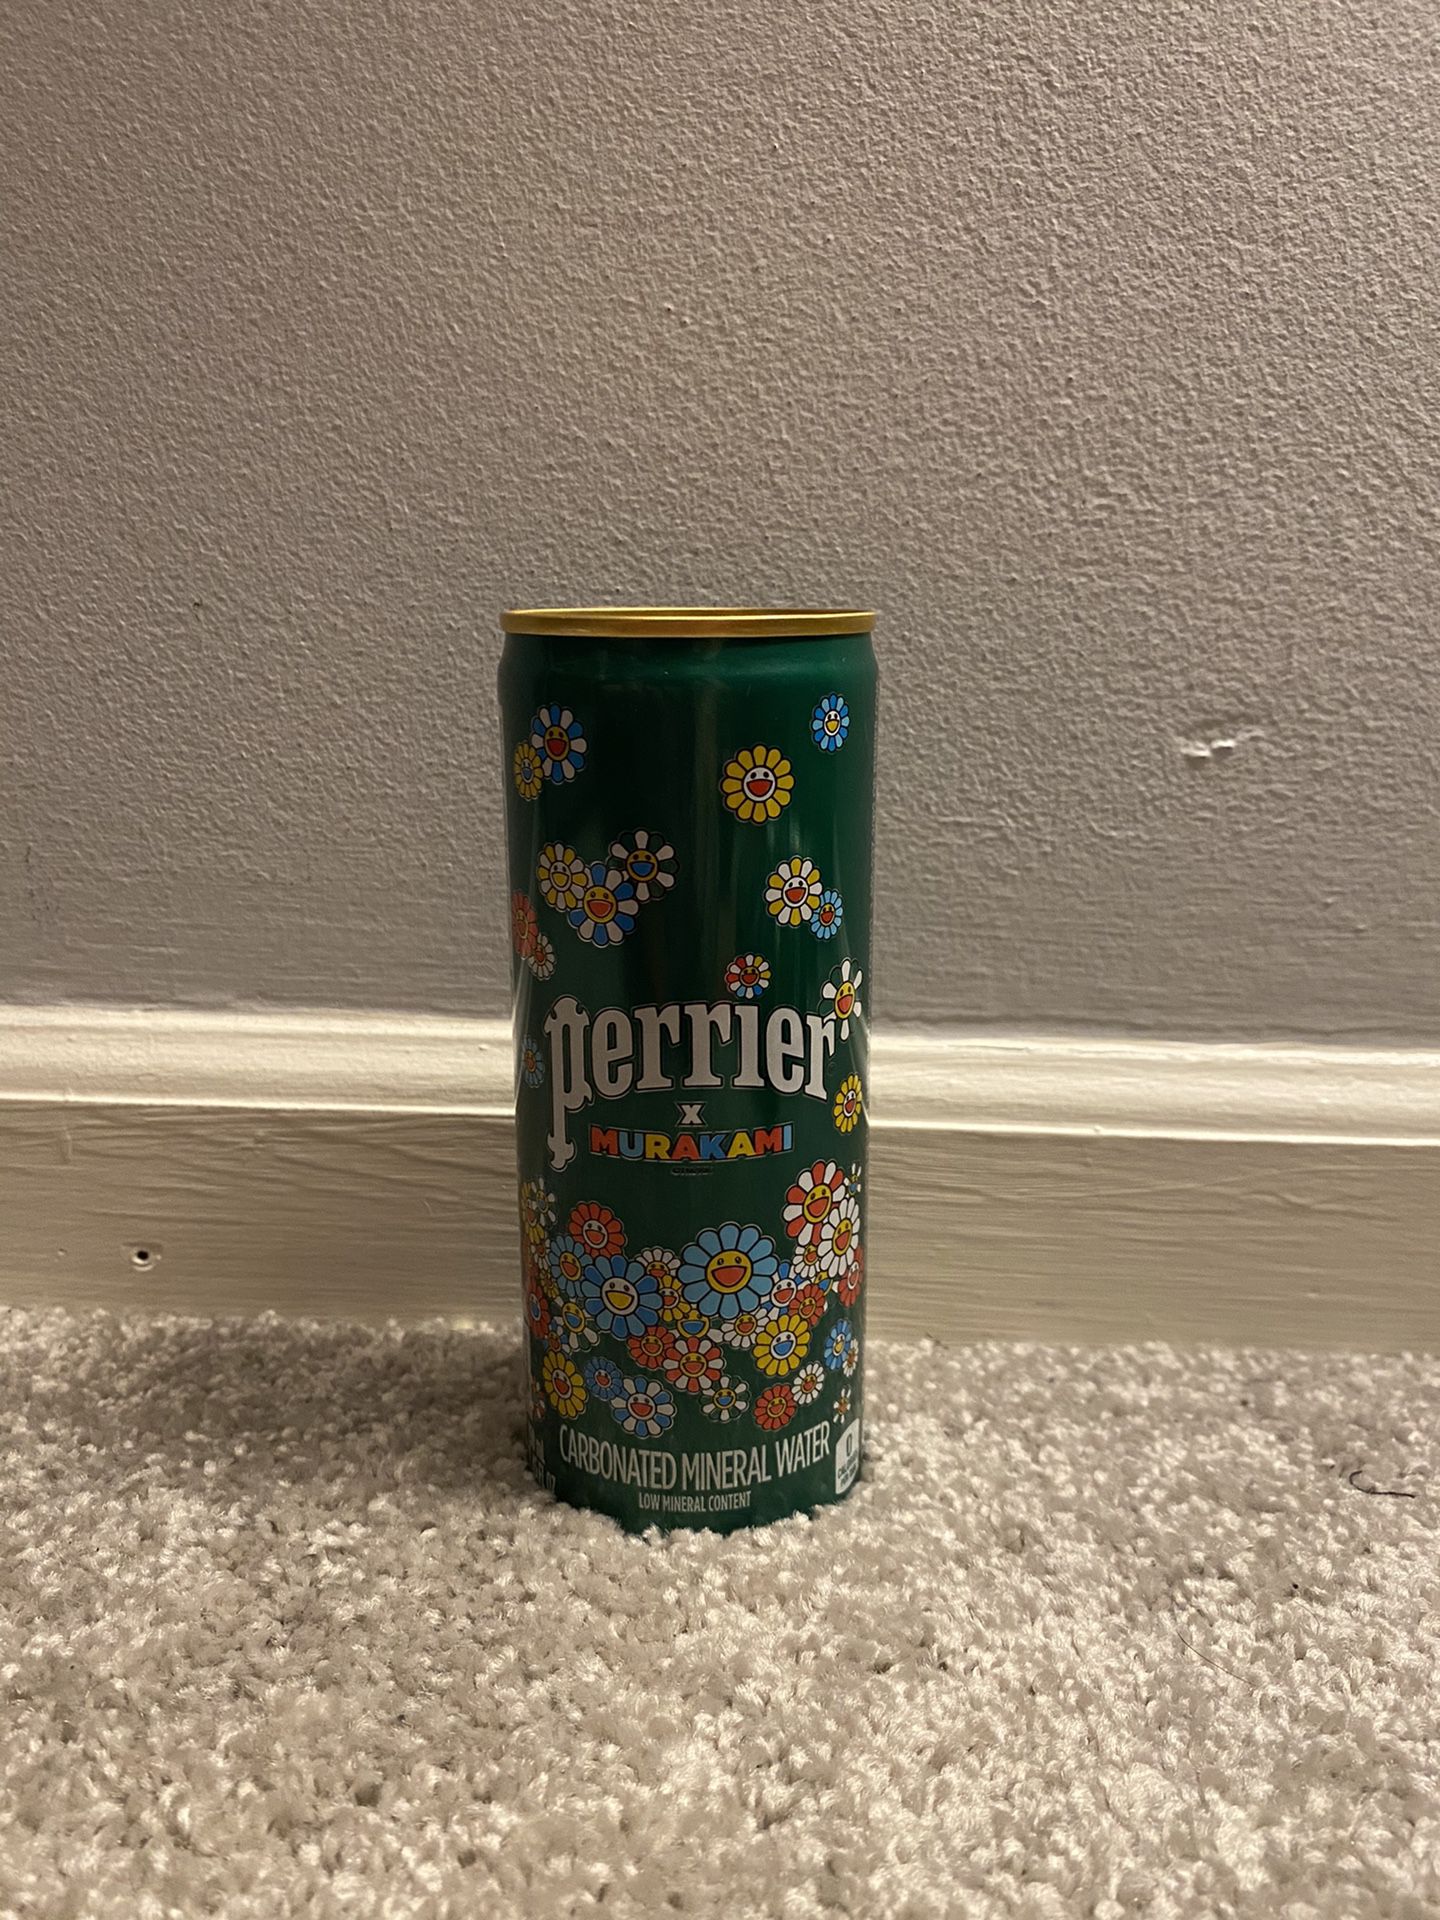 Perrier x Murakami Mineral Water Aluminum Cans (6 Available)